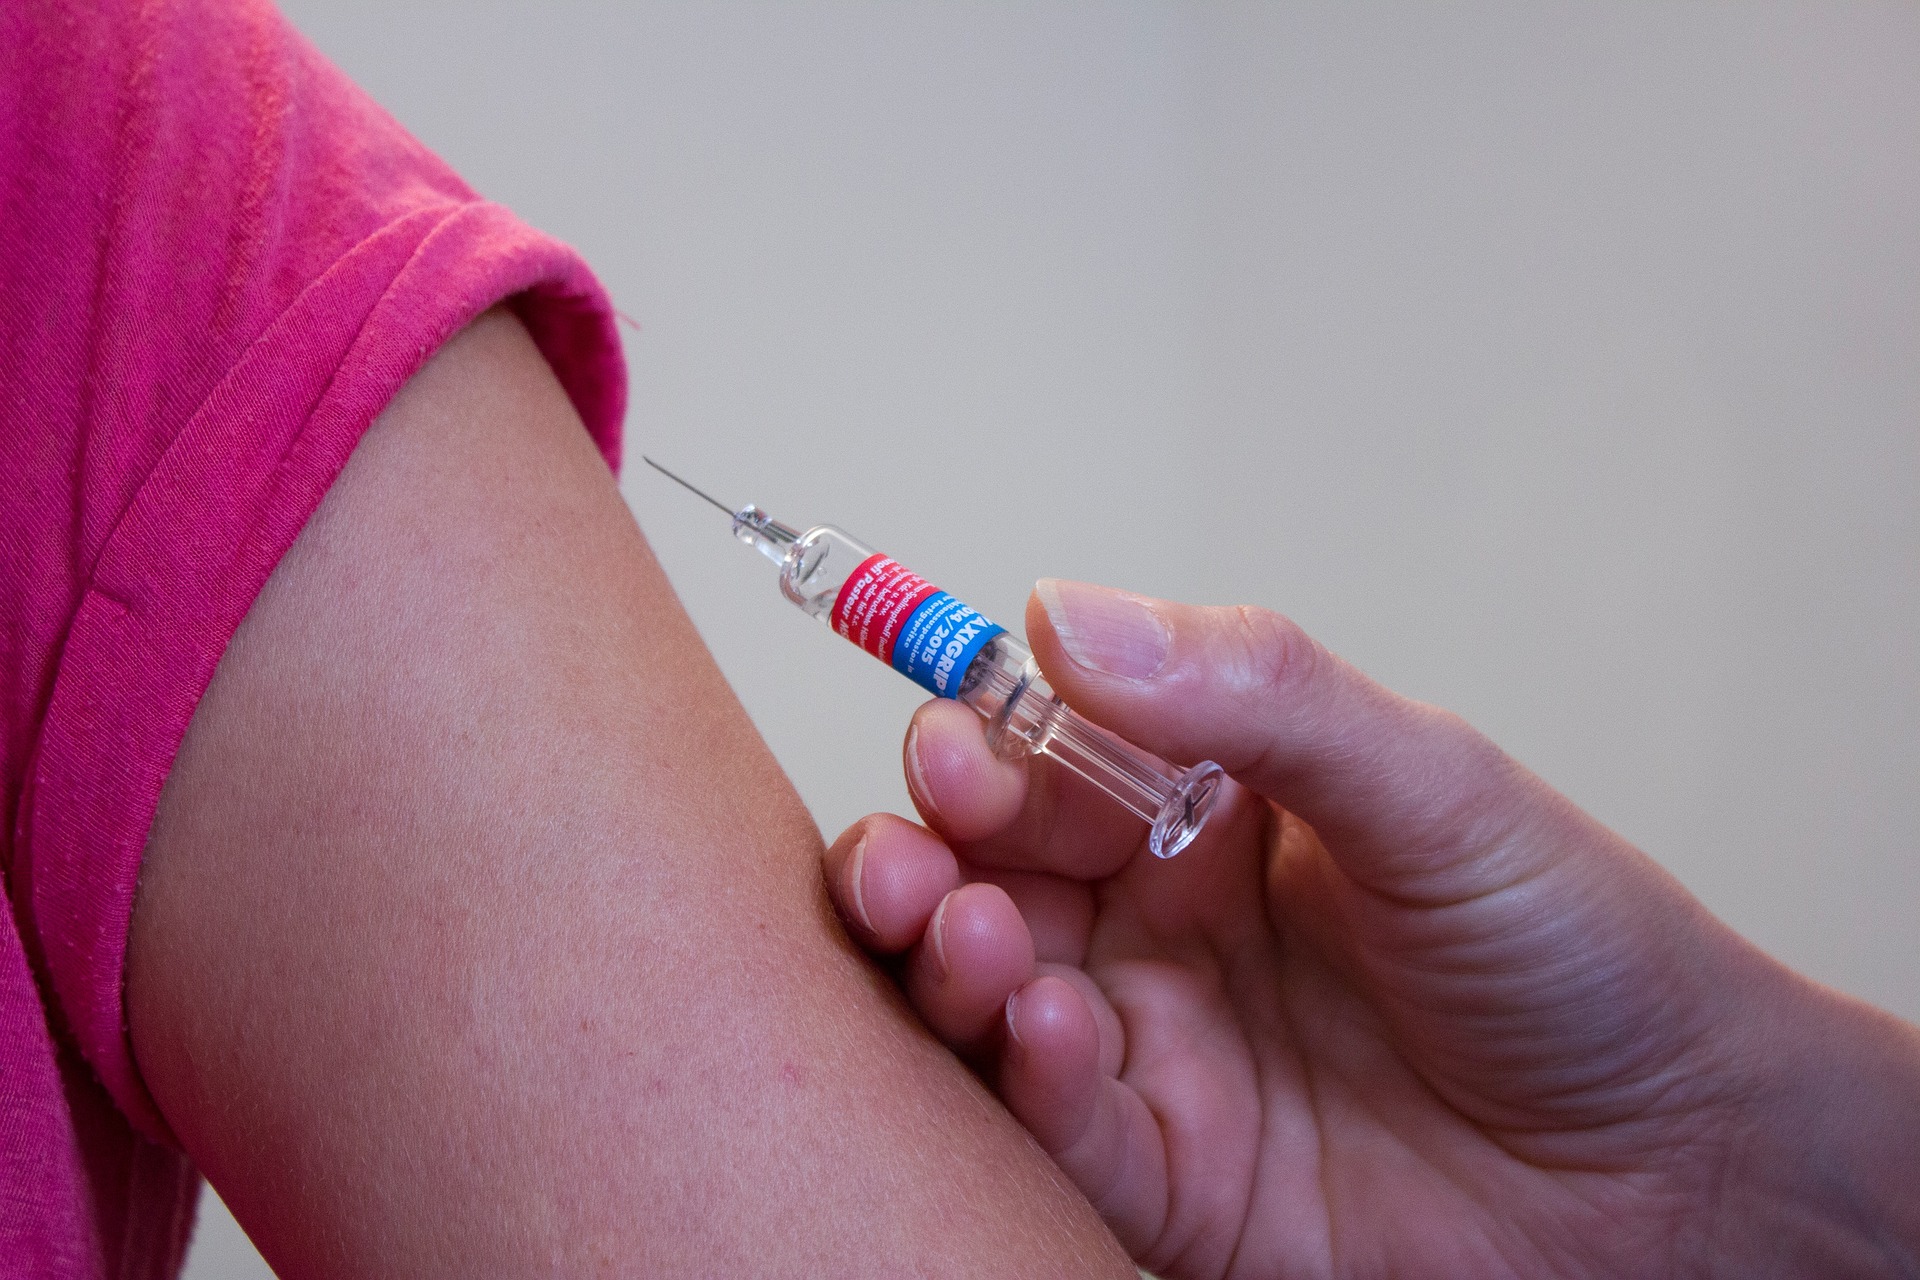 Hunt says shipment blockage won’t affect vaccine rollout plan